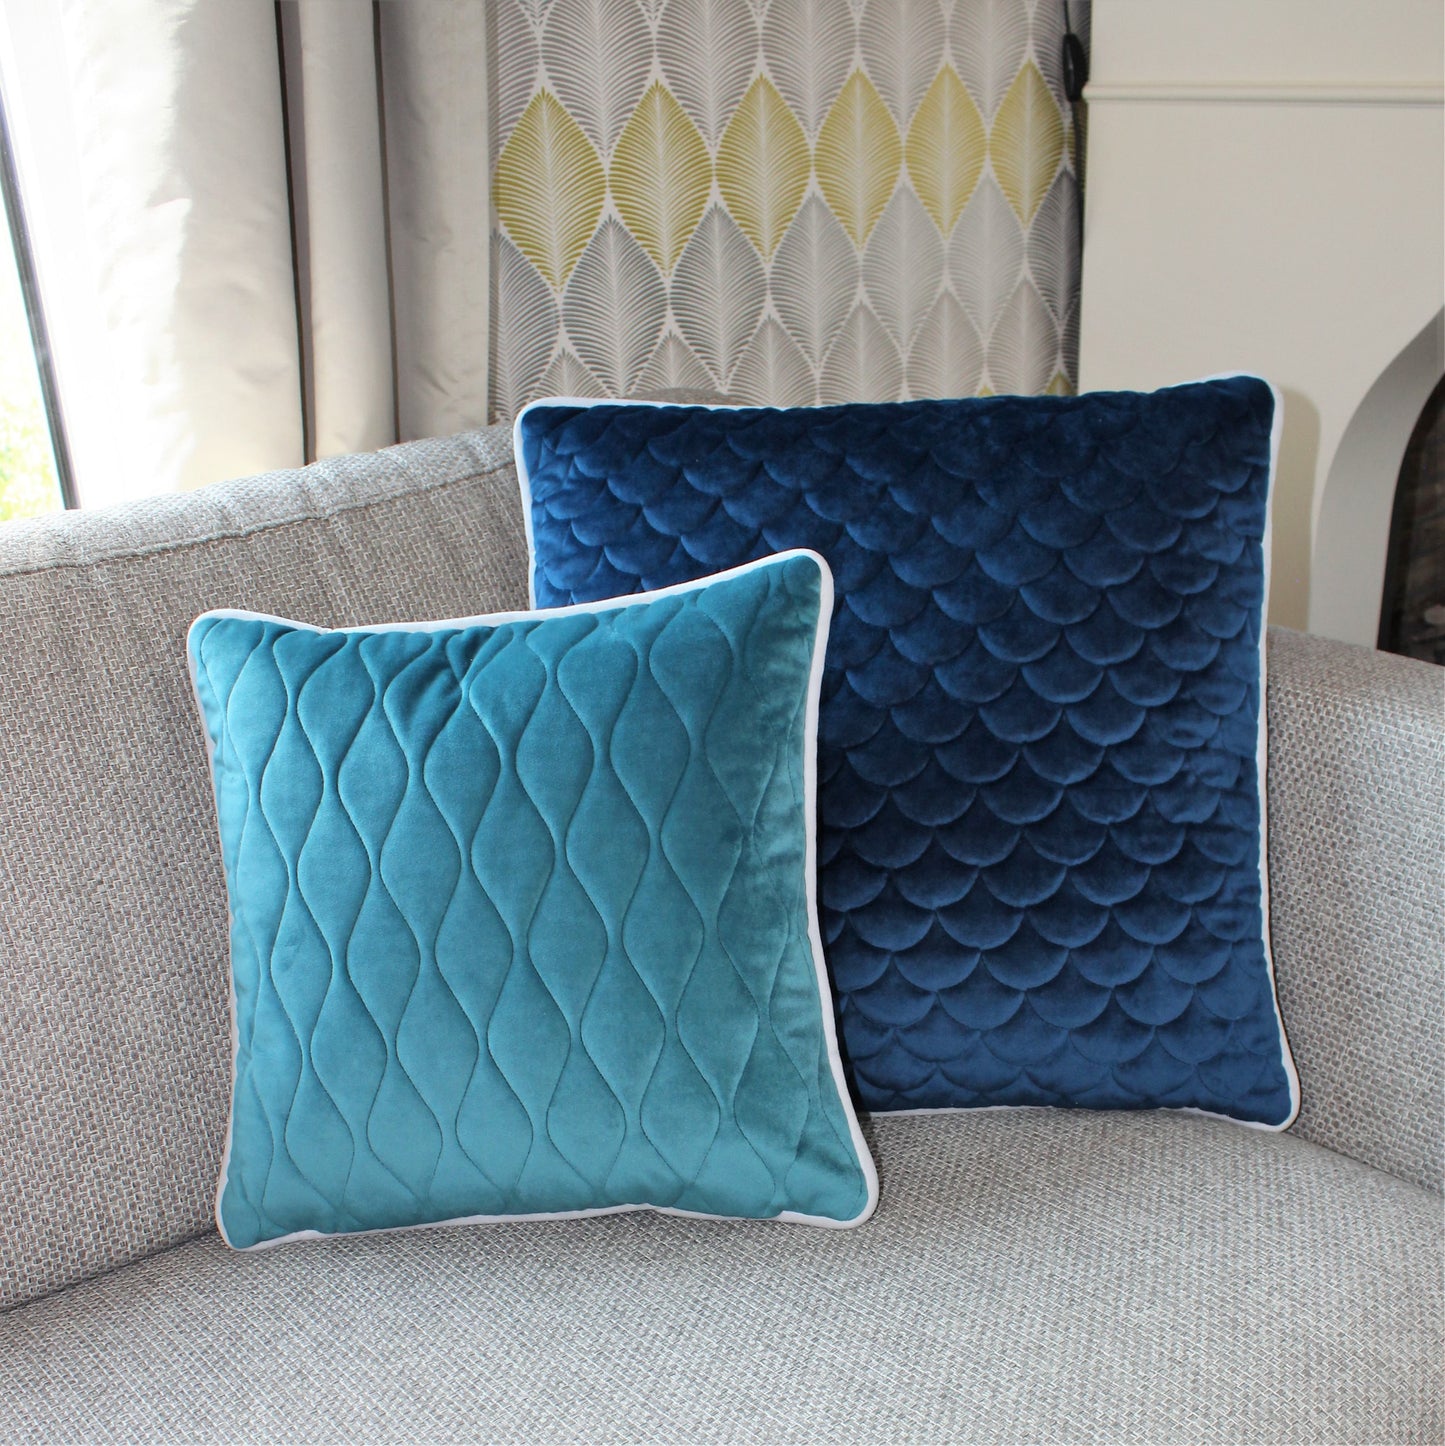 Cushion velvet blue quilted with piping sofa cushion 50 x 50 cm